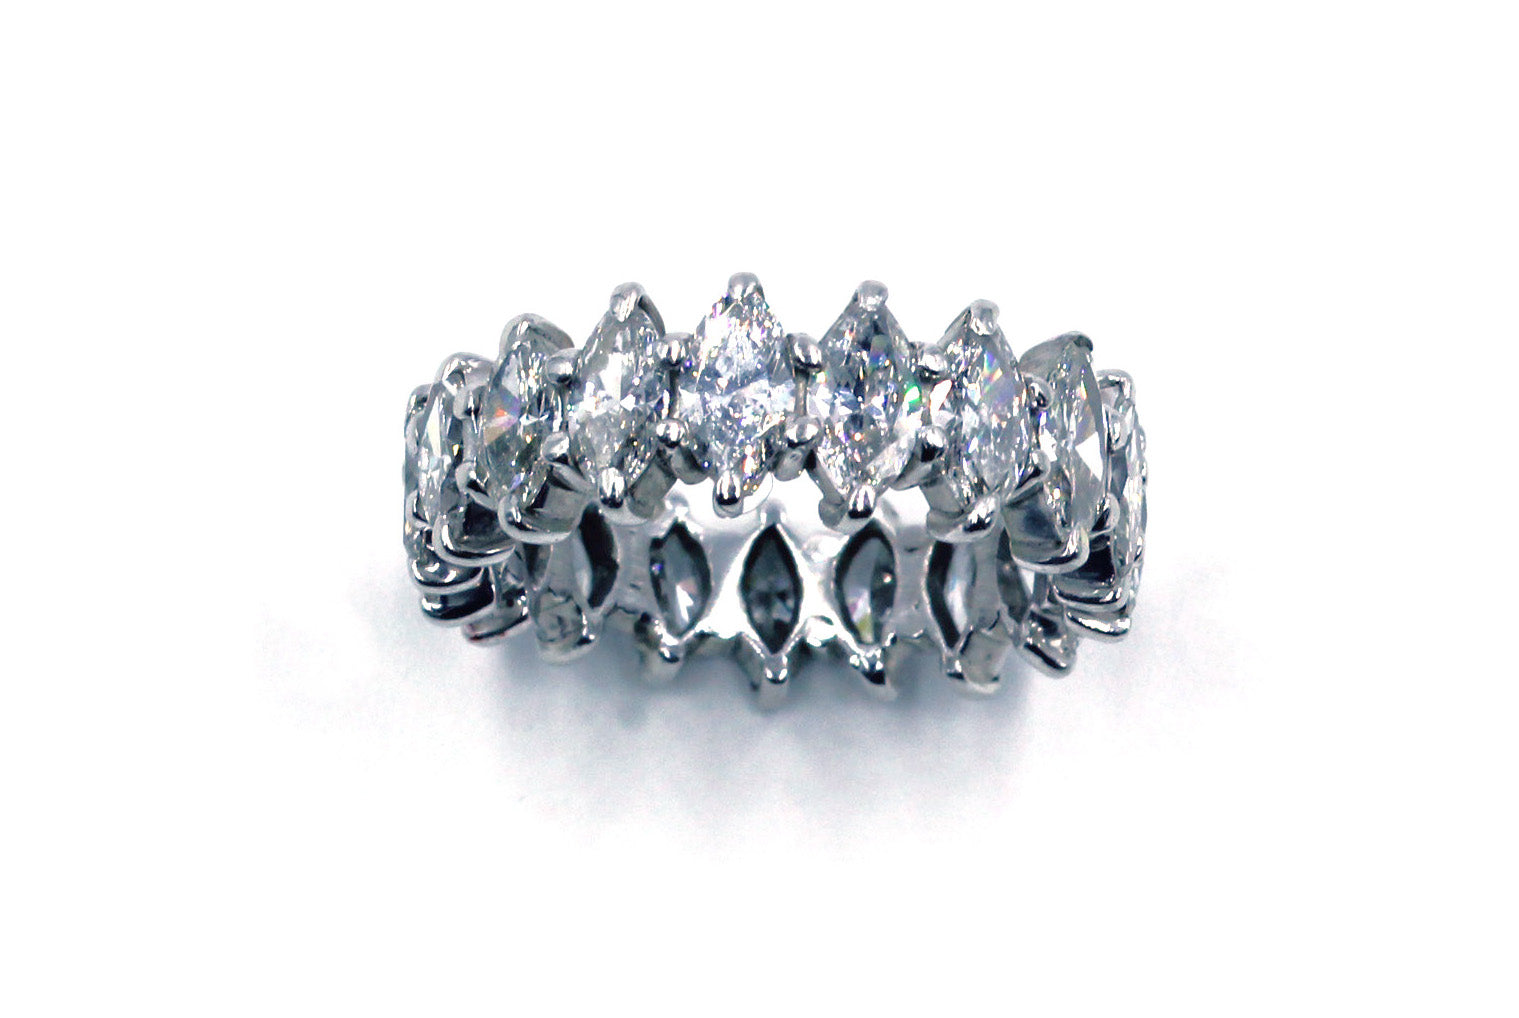 Vintage Marquise Diamond Ring, SOLD